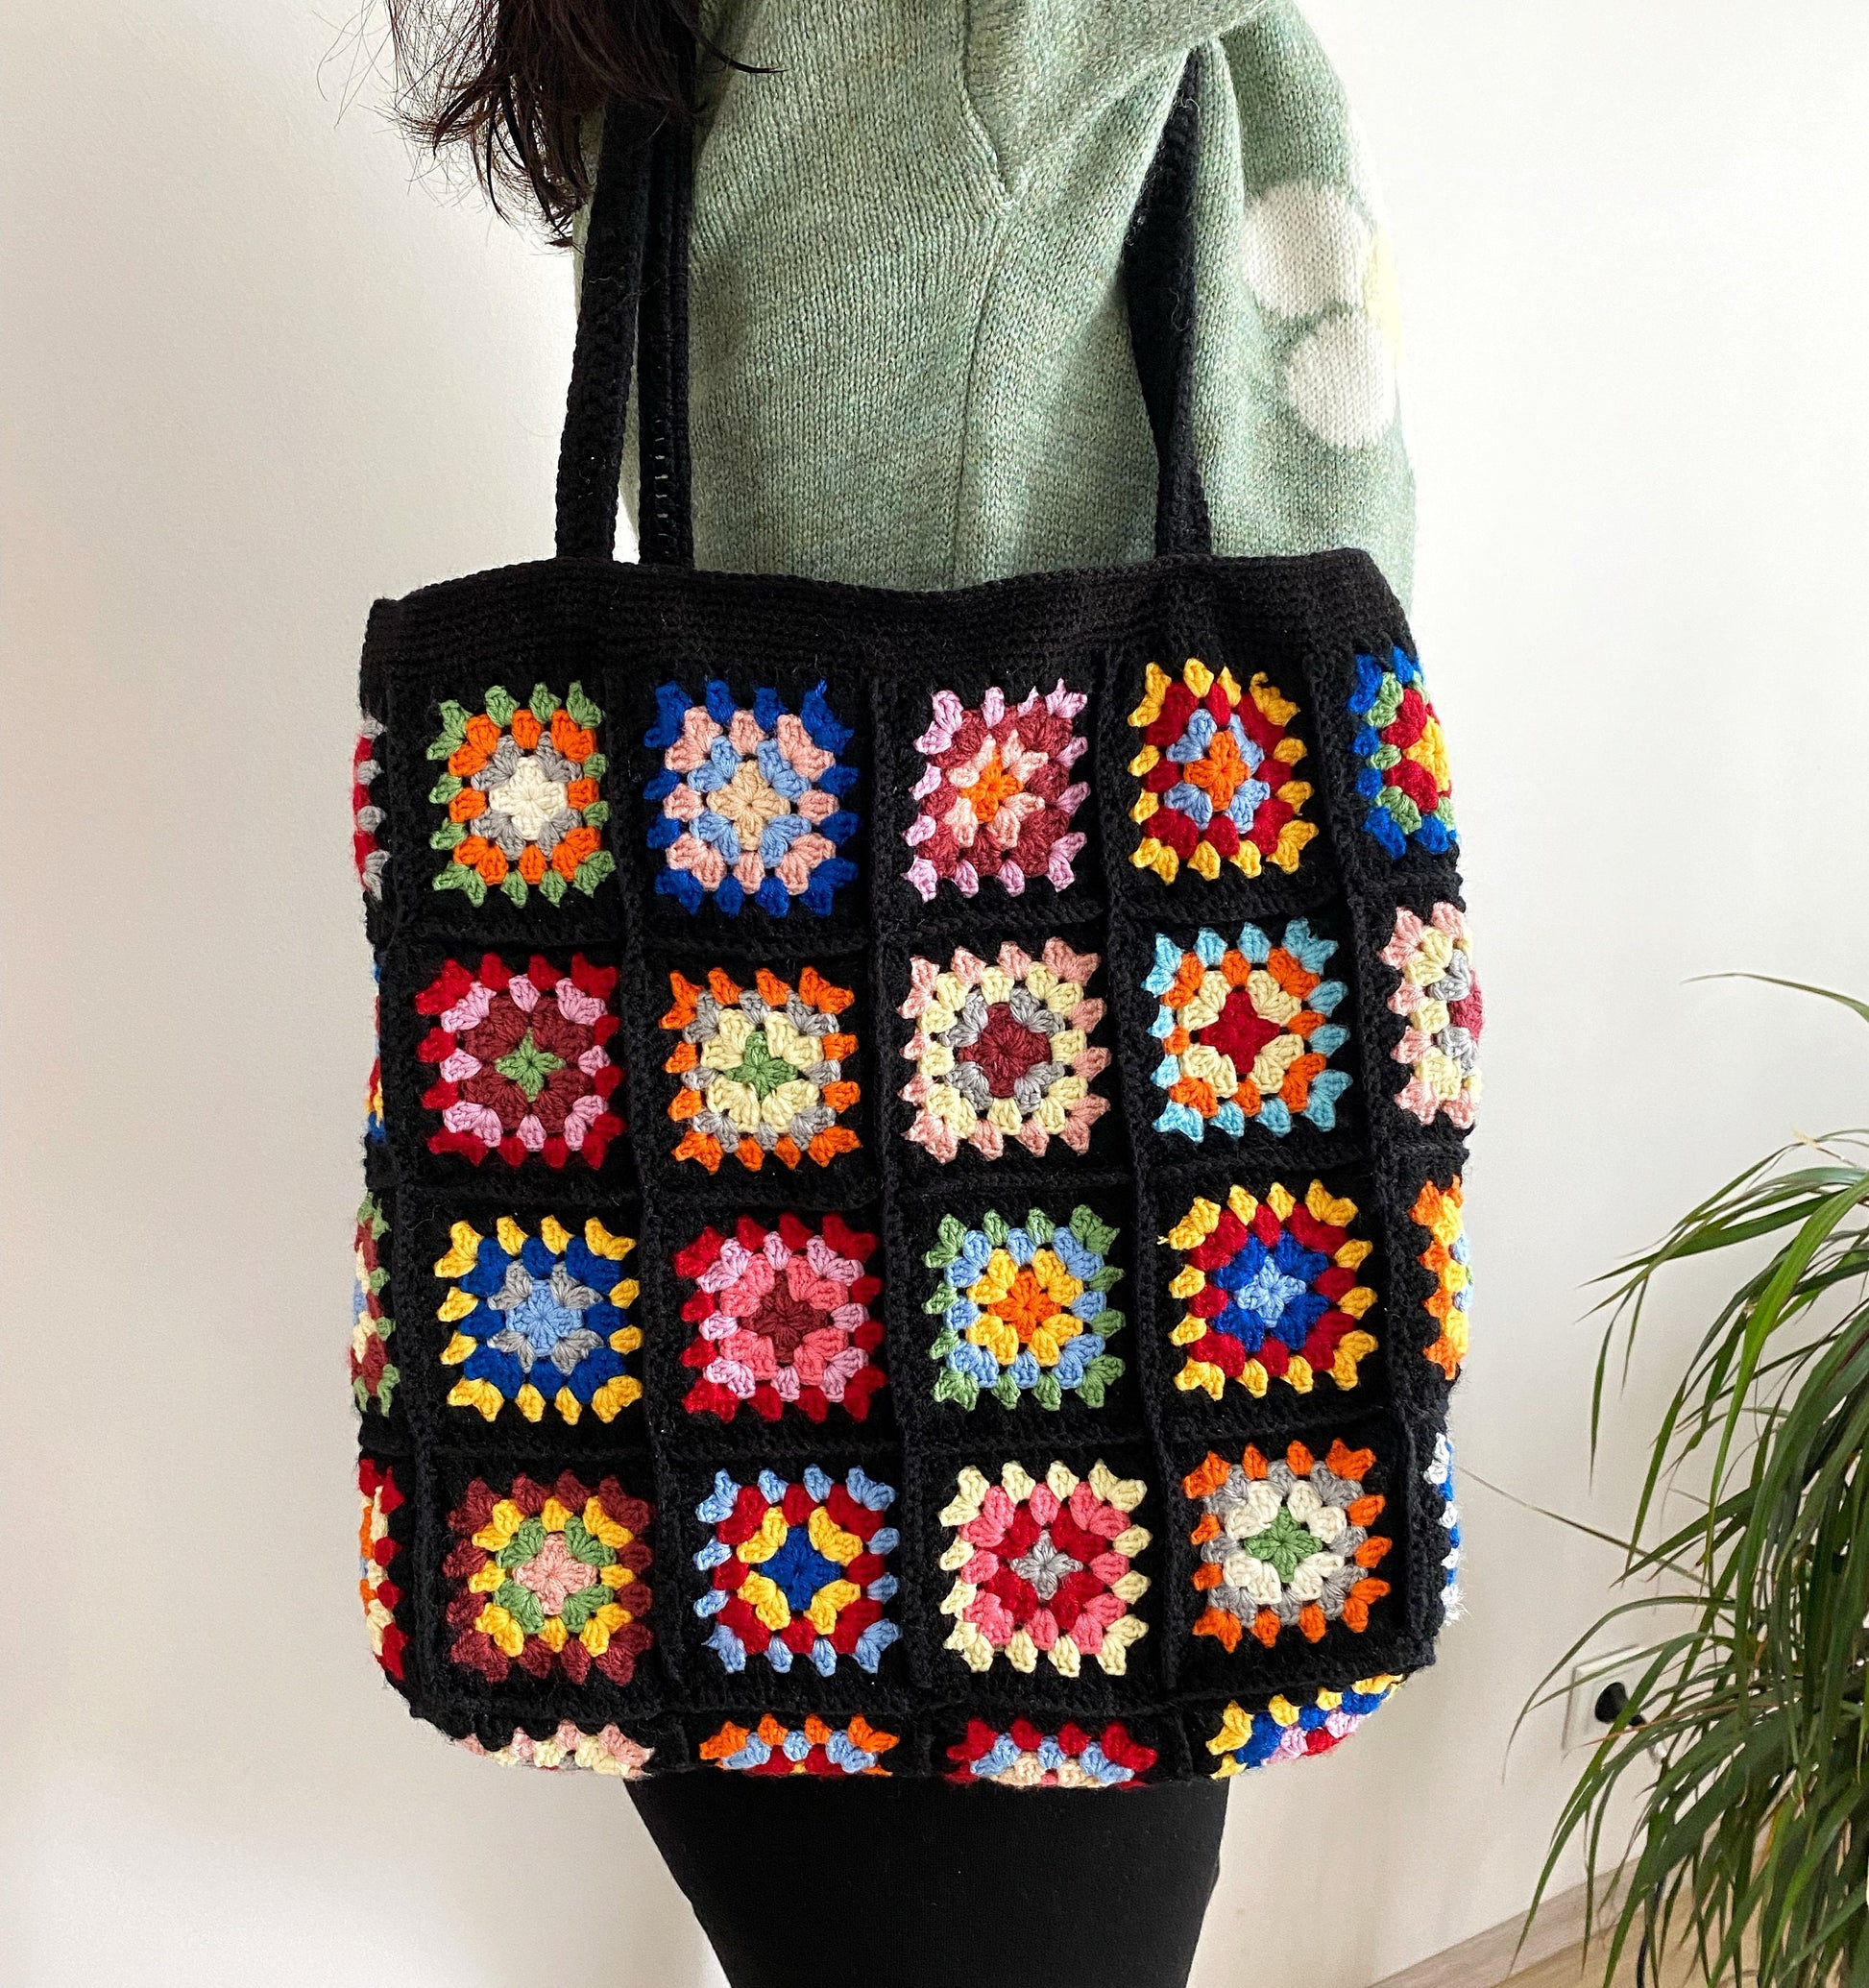 Hand Bag Star Design Crocheted Knit Purse Tote Y2k Aesthetic 